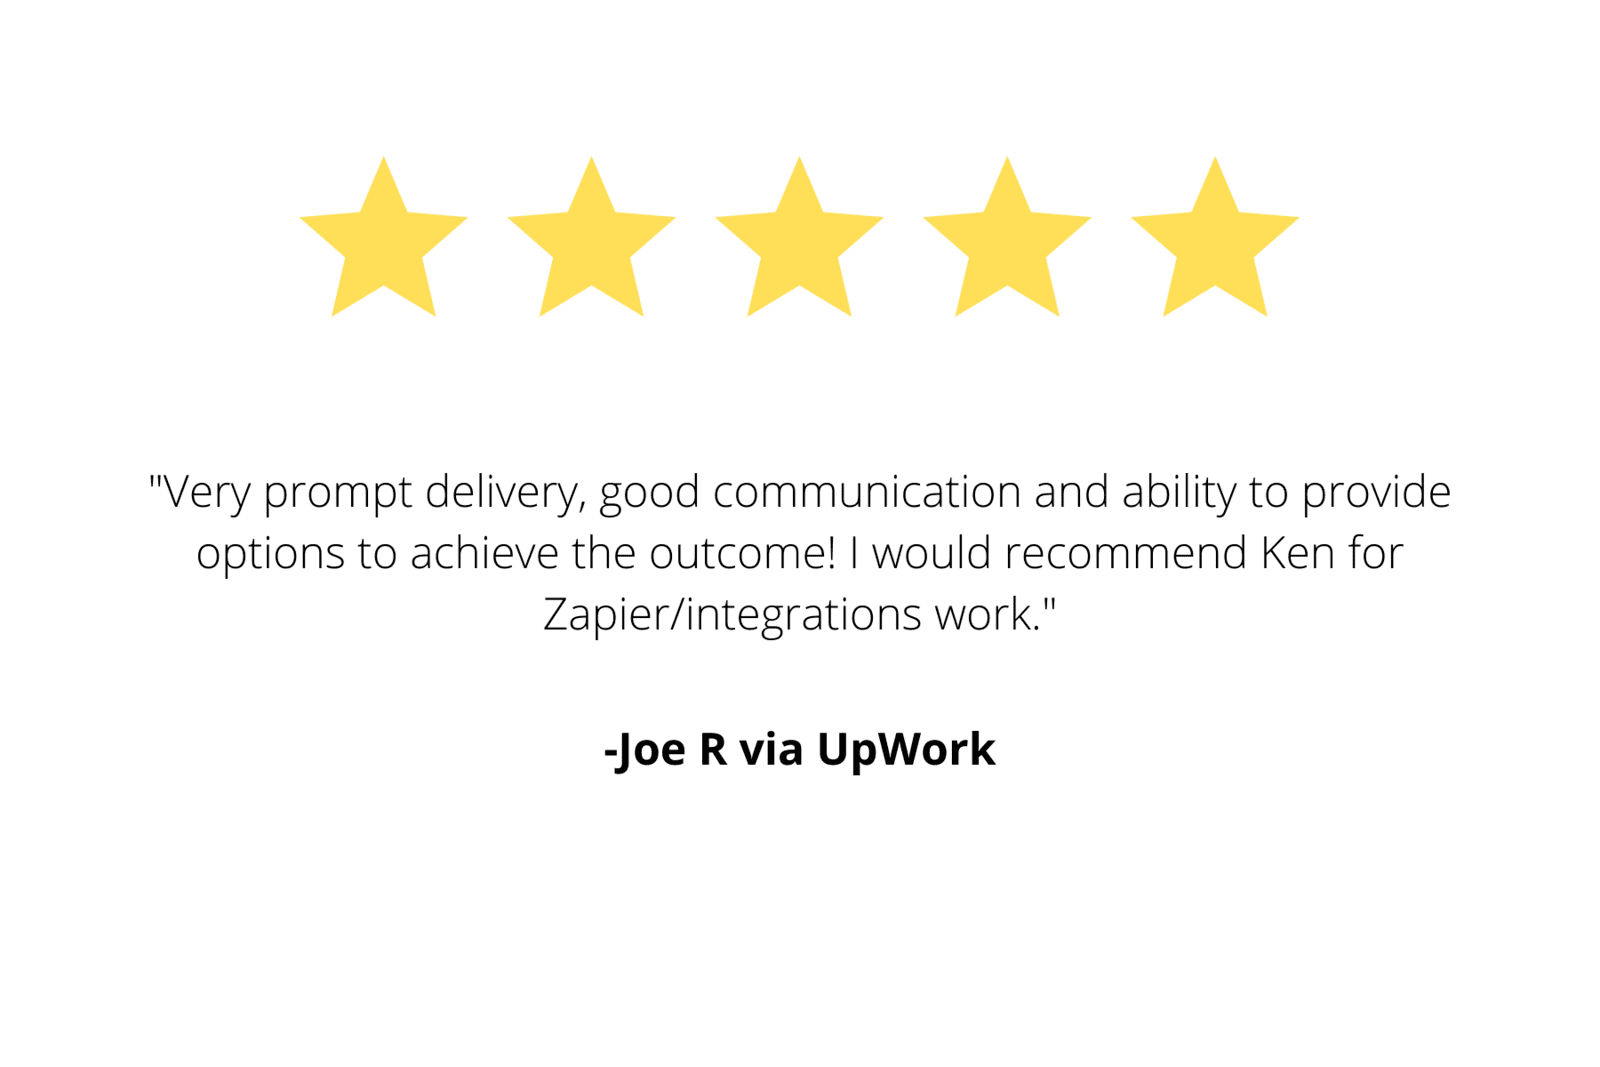 "Very prompt delivery, good communication and ability to provide options to achieve the outcome! I would recommend Ken for Zapier/integrations work."